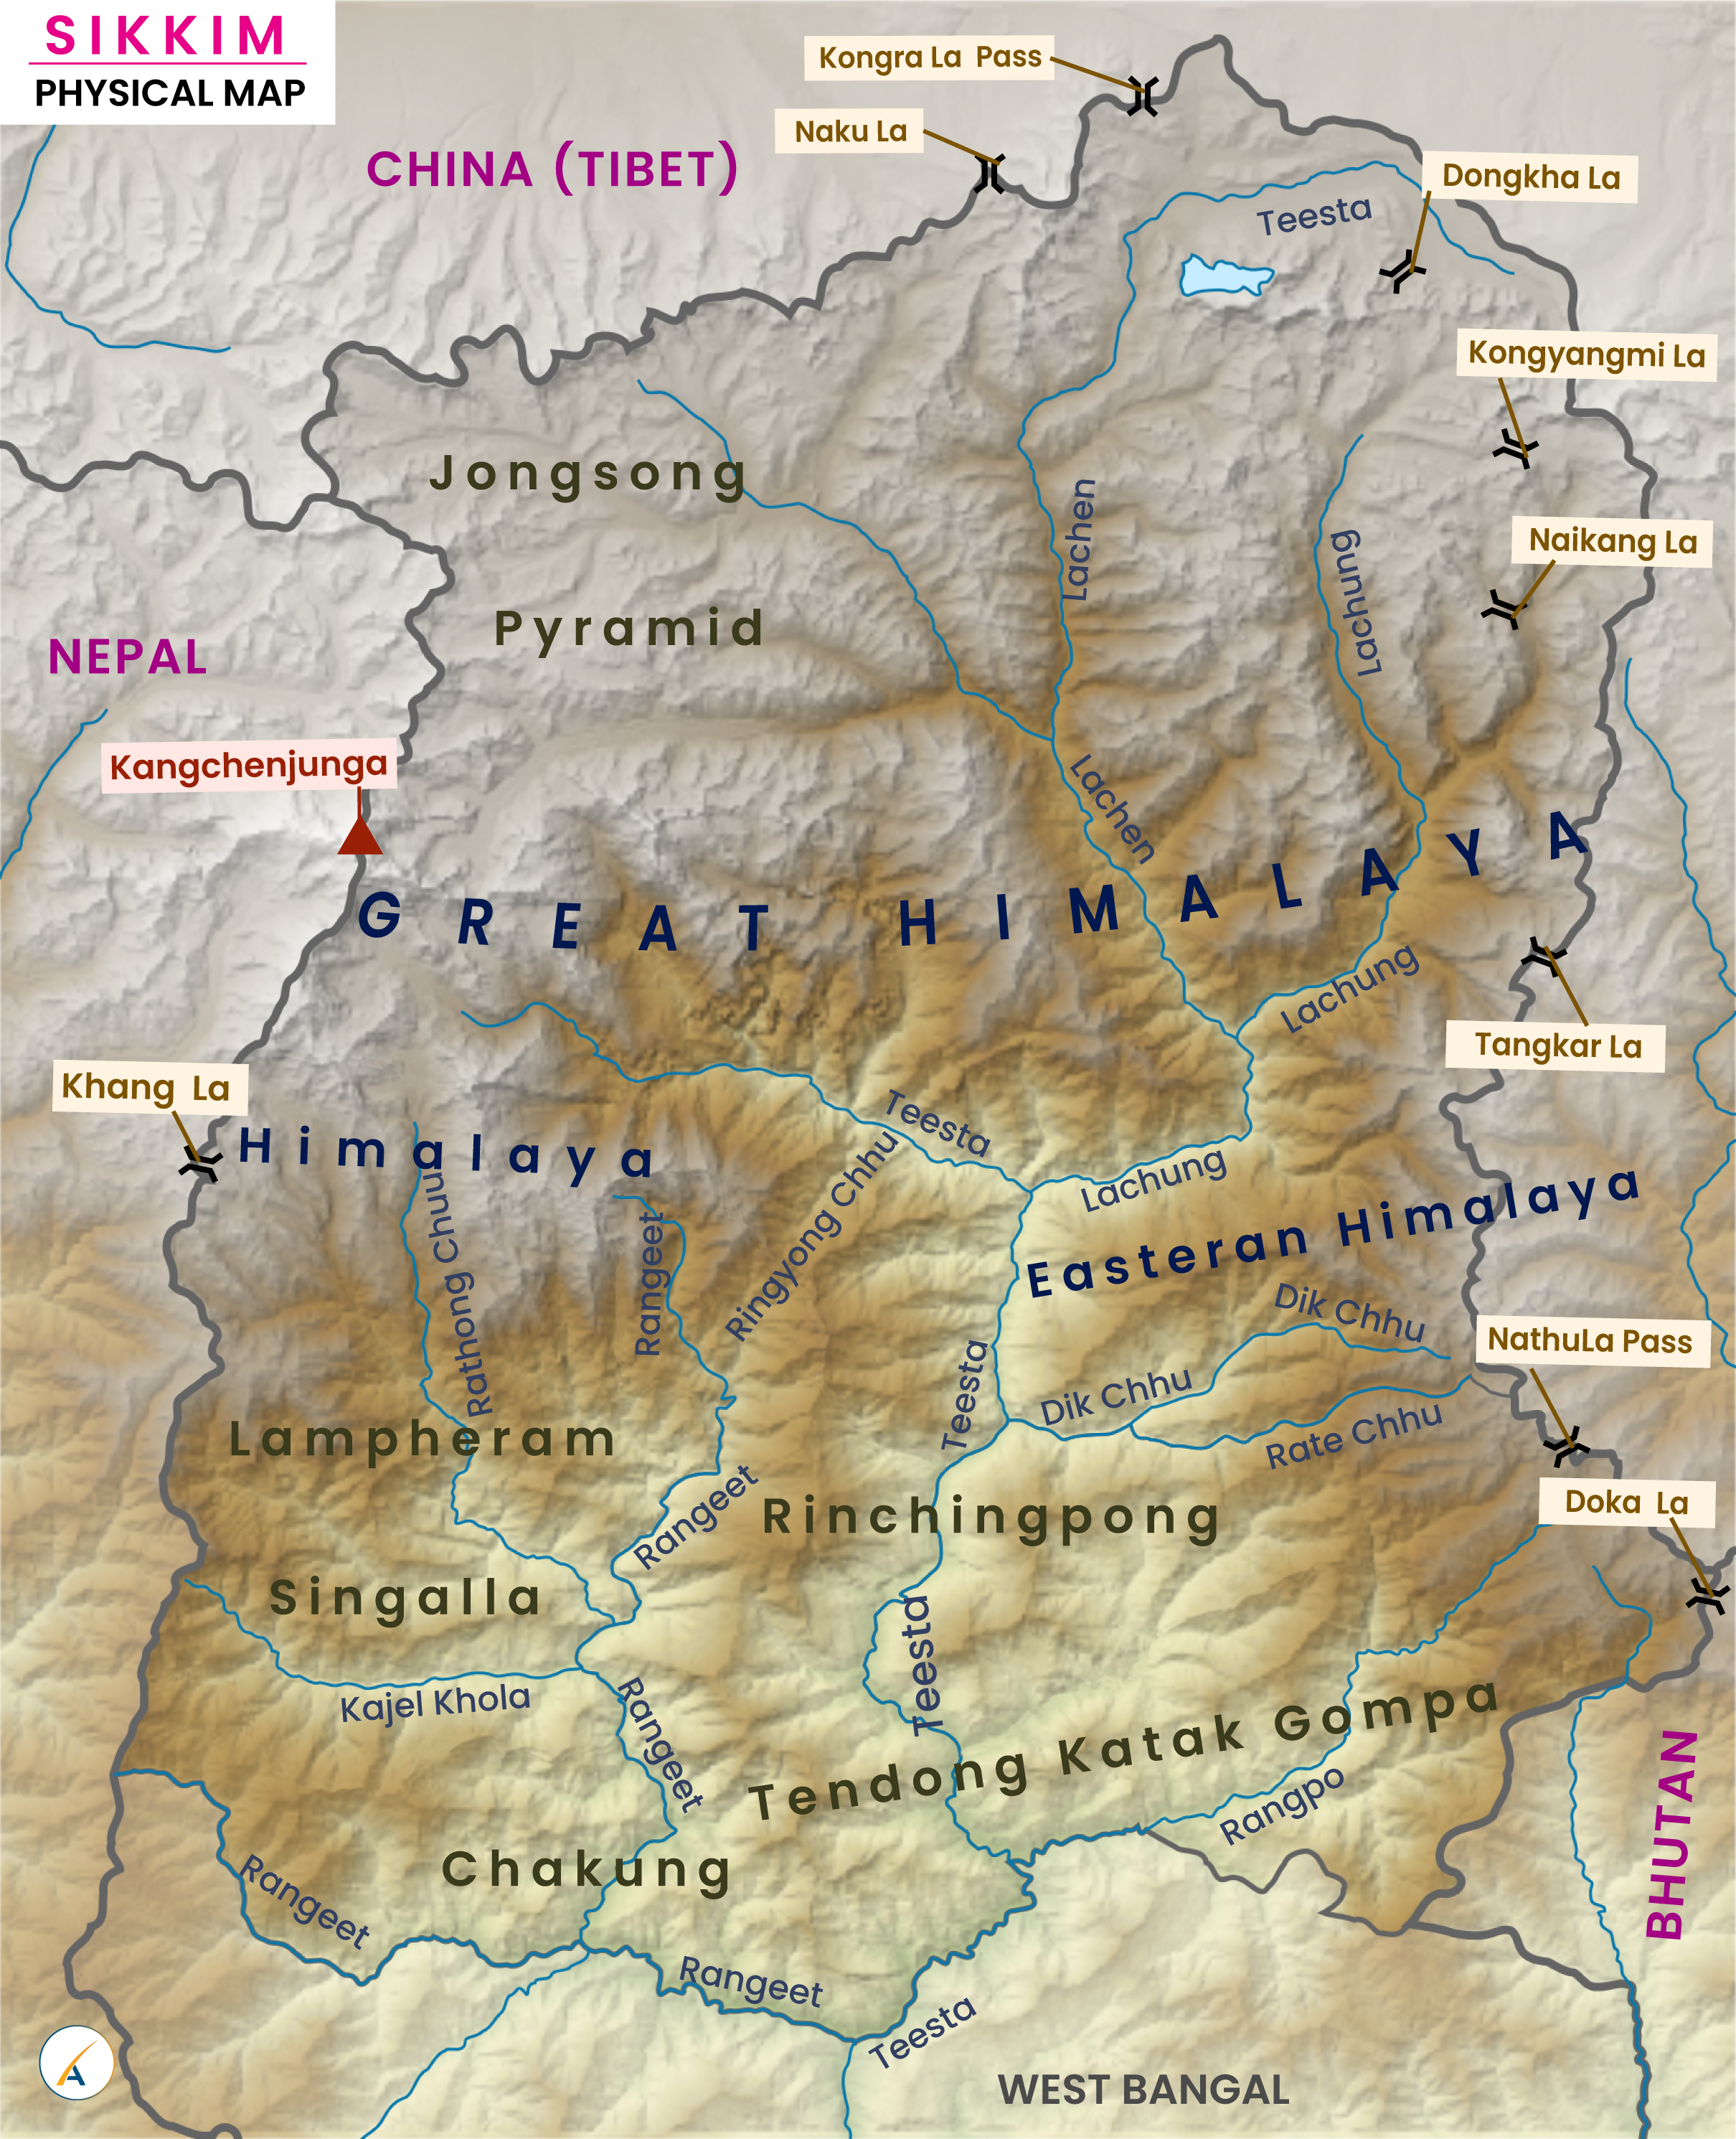 Sikkim Physical Map